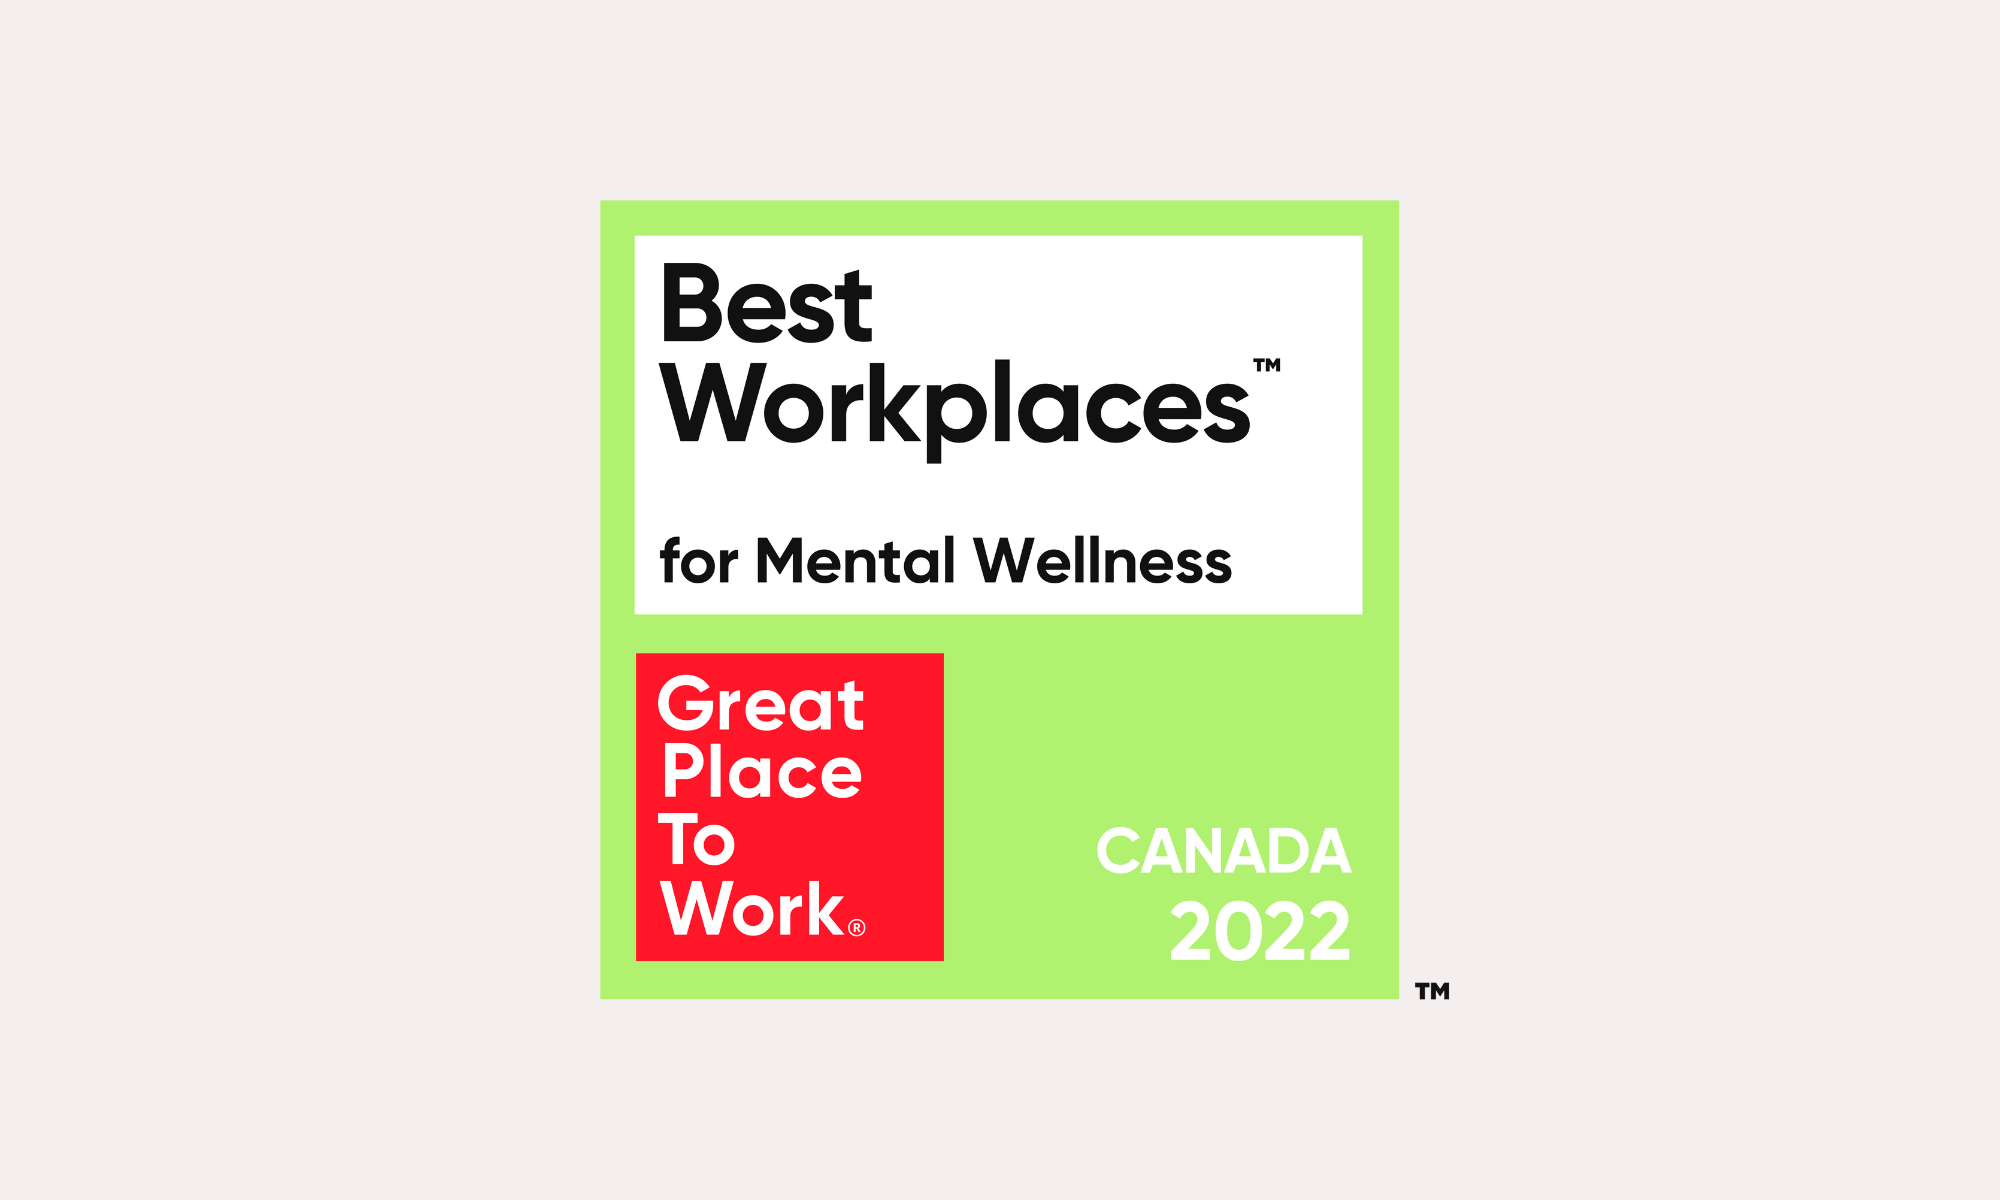 Symetris is a best workplace for mental wellness